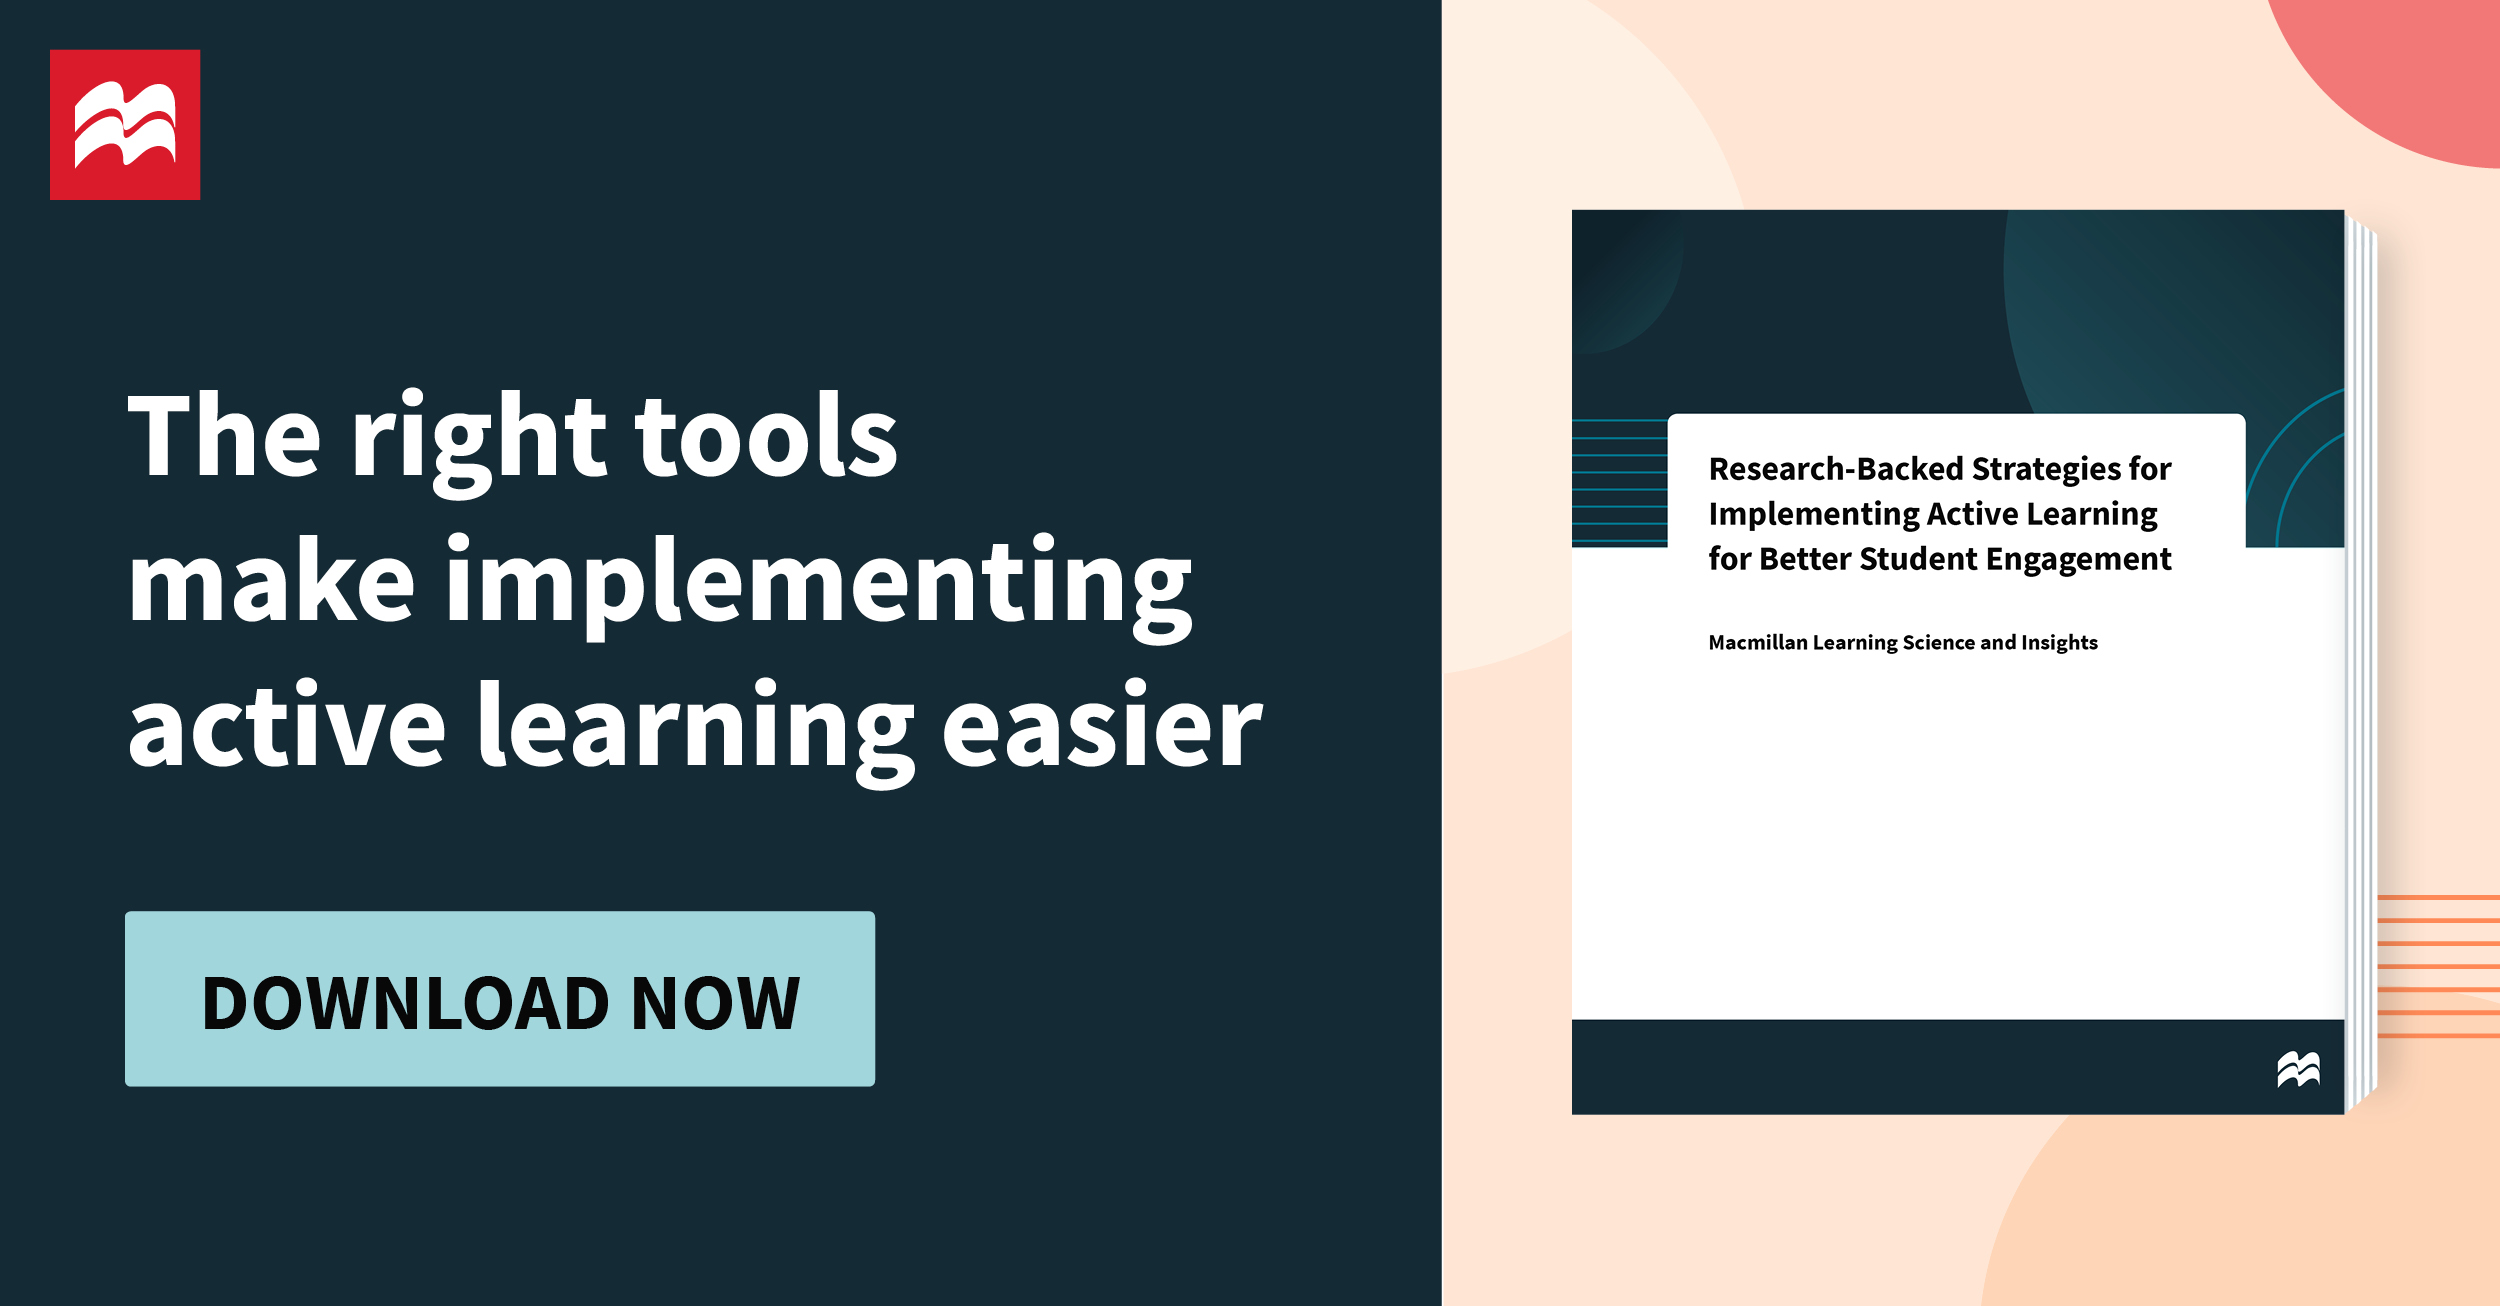 The right tools make implementing active learning easier